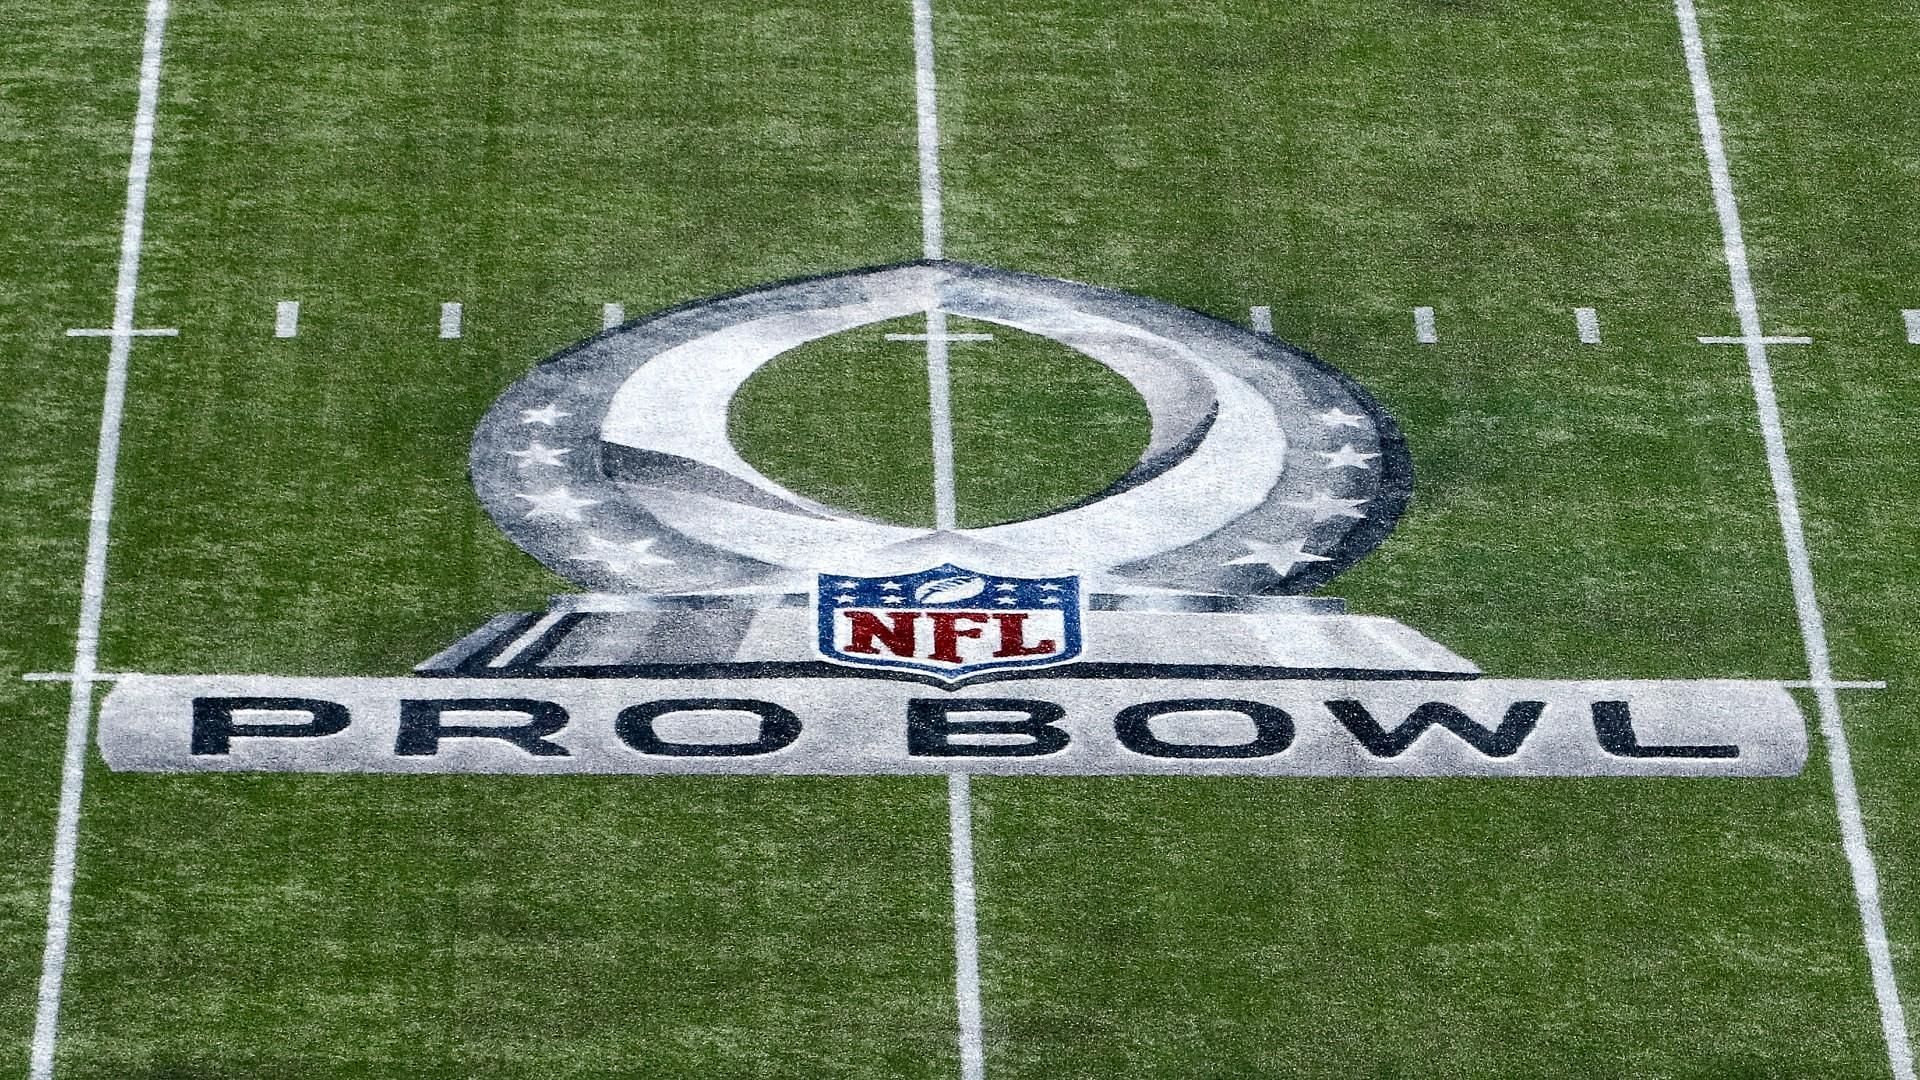 The NFL changed the Pro Bowl from a single game to a series of skill competitions